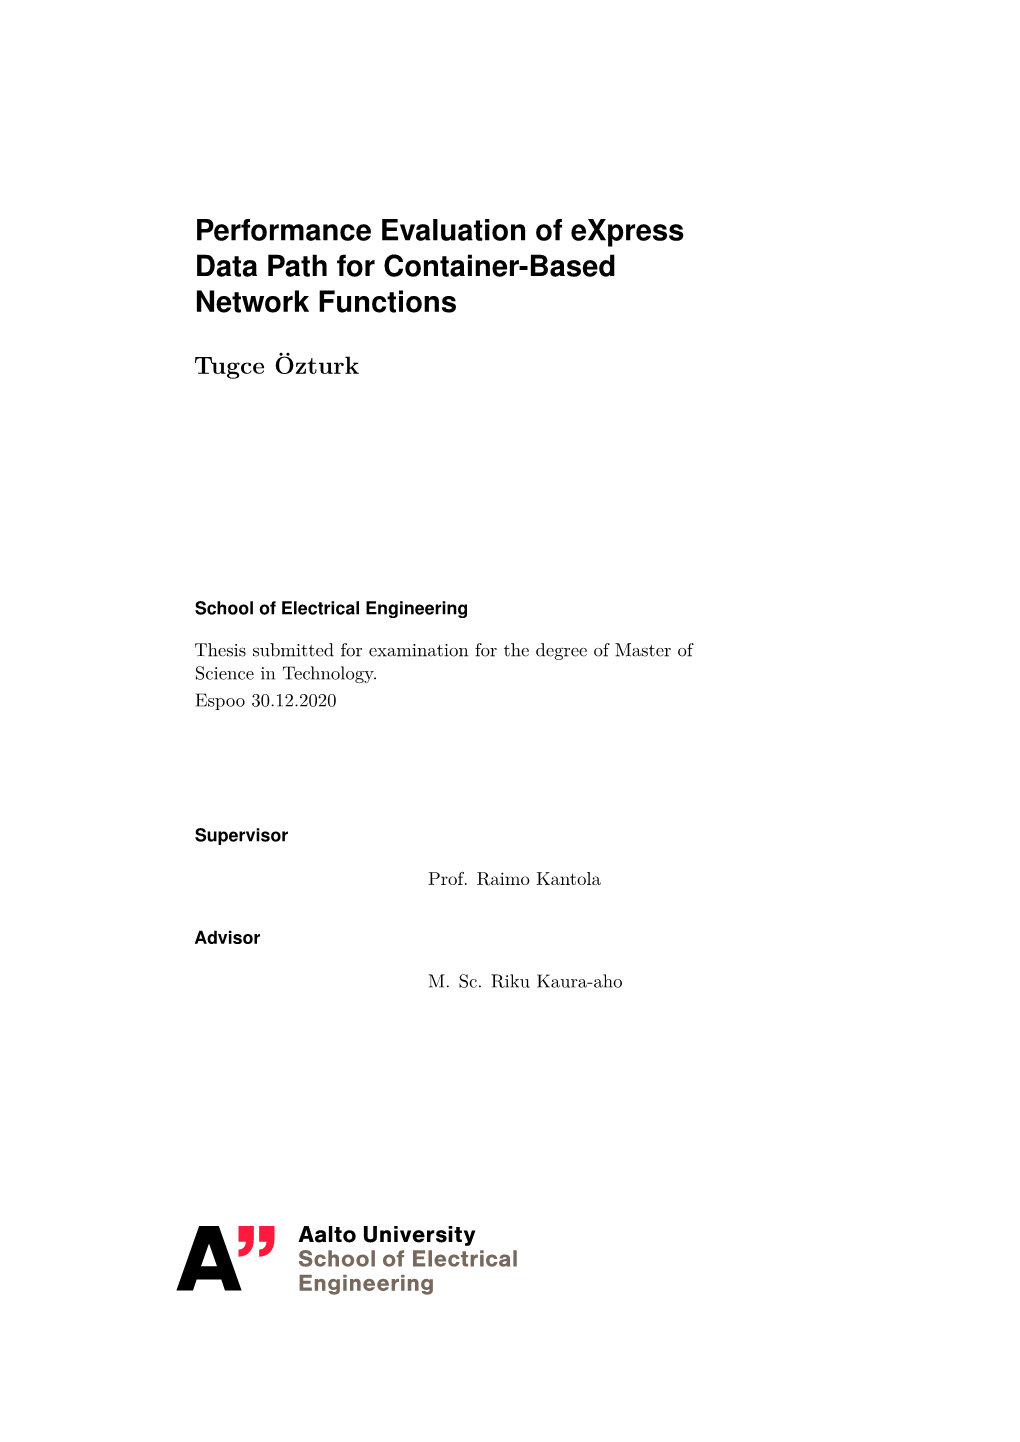 Performance Evaluation of Express Data Path for Container-Based Network Functions